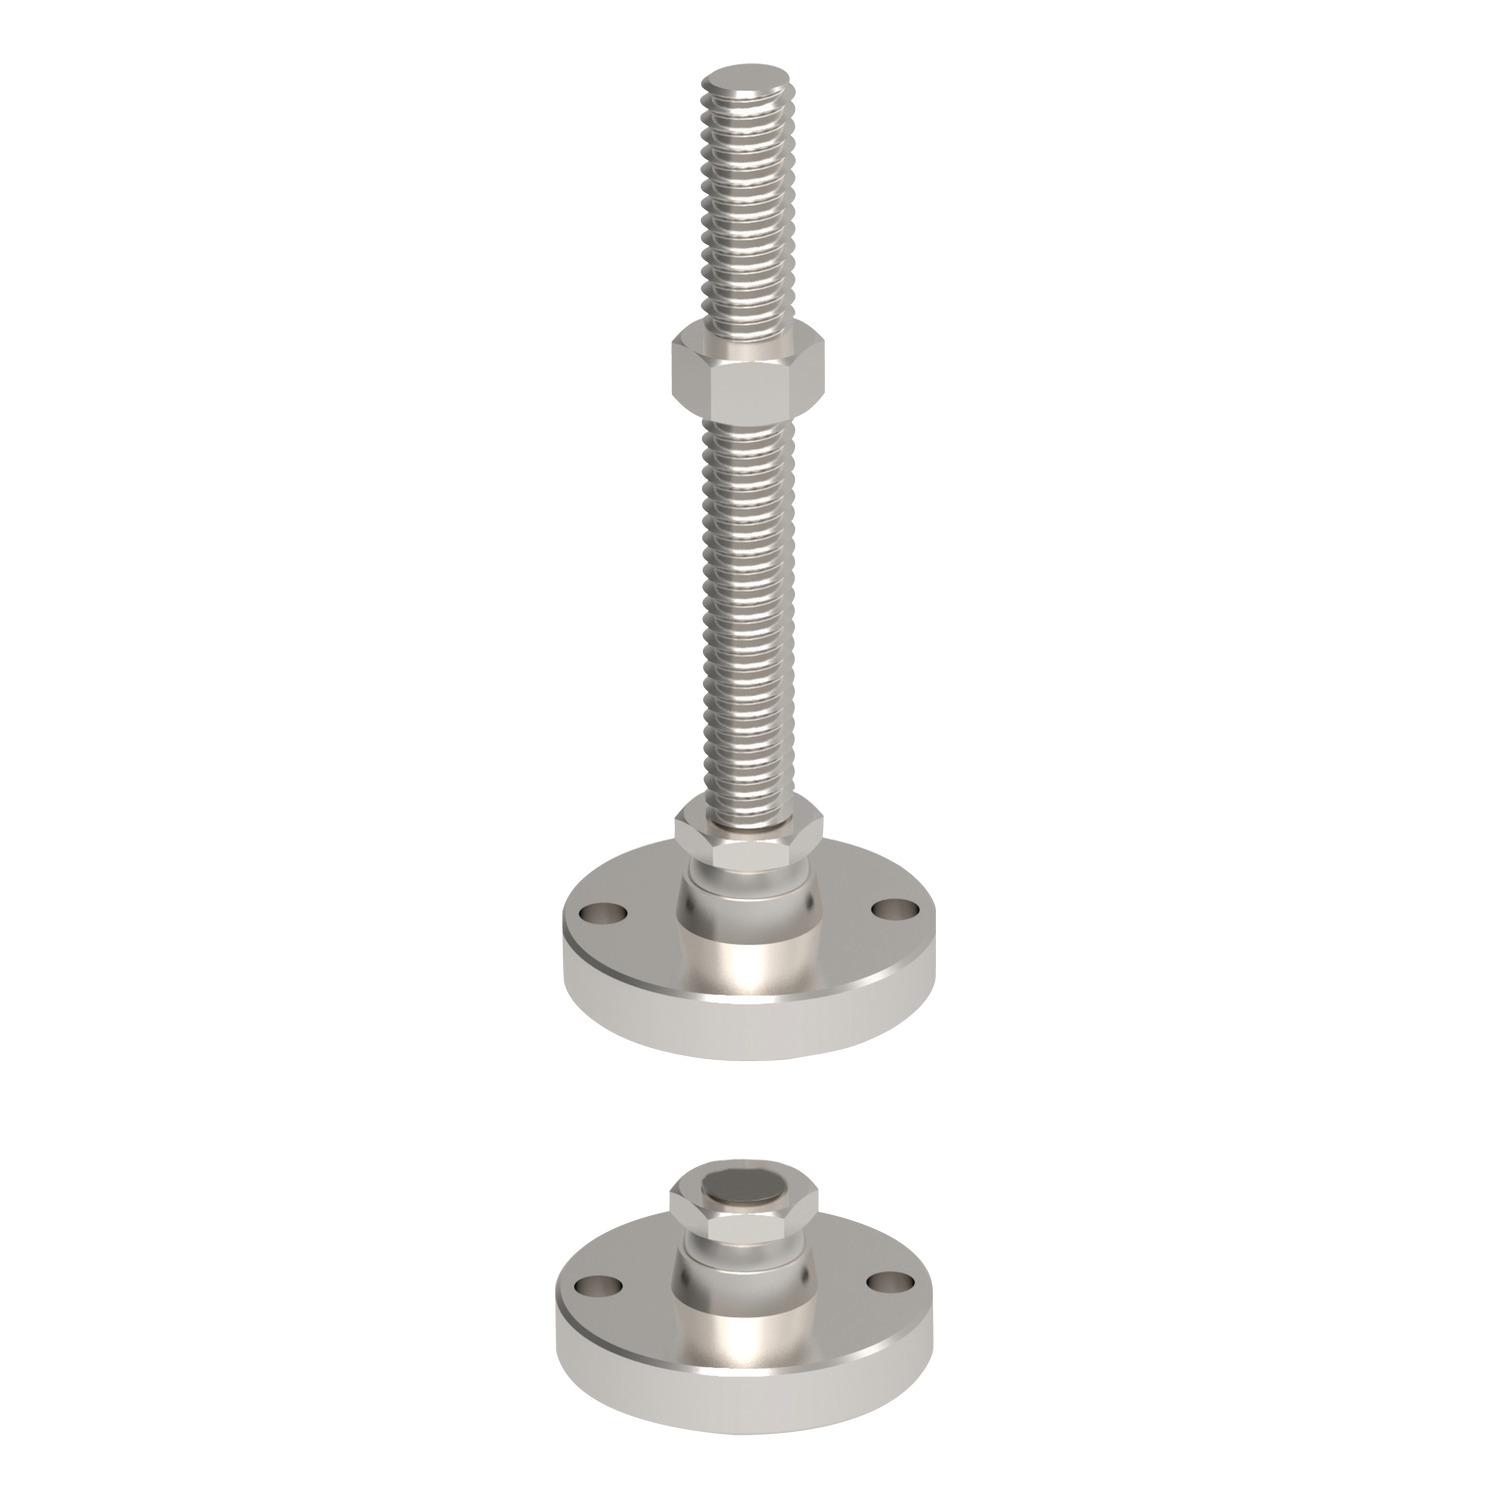 Levelling Feet - Bolt Down, Heavy Duty Our 34713 range features bolt down pads as well as a full assembly of heavy duty bolt down levelling feet.